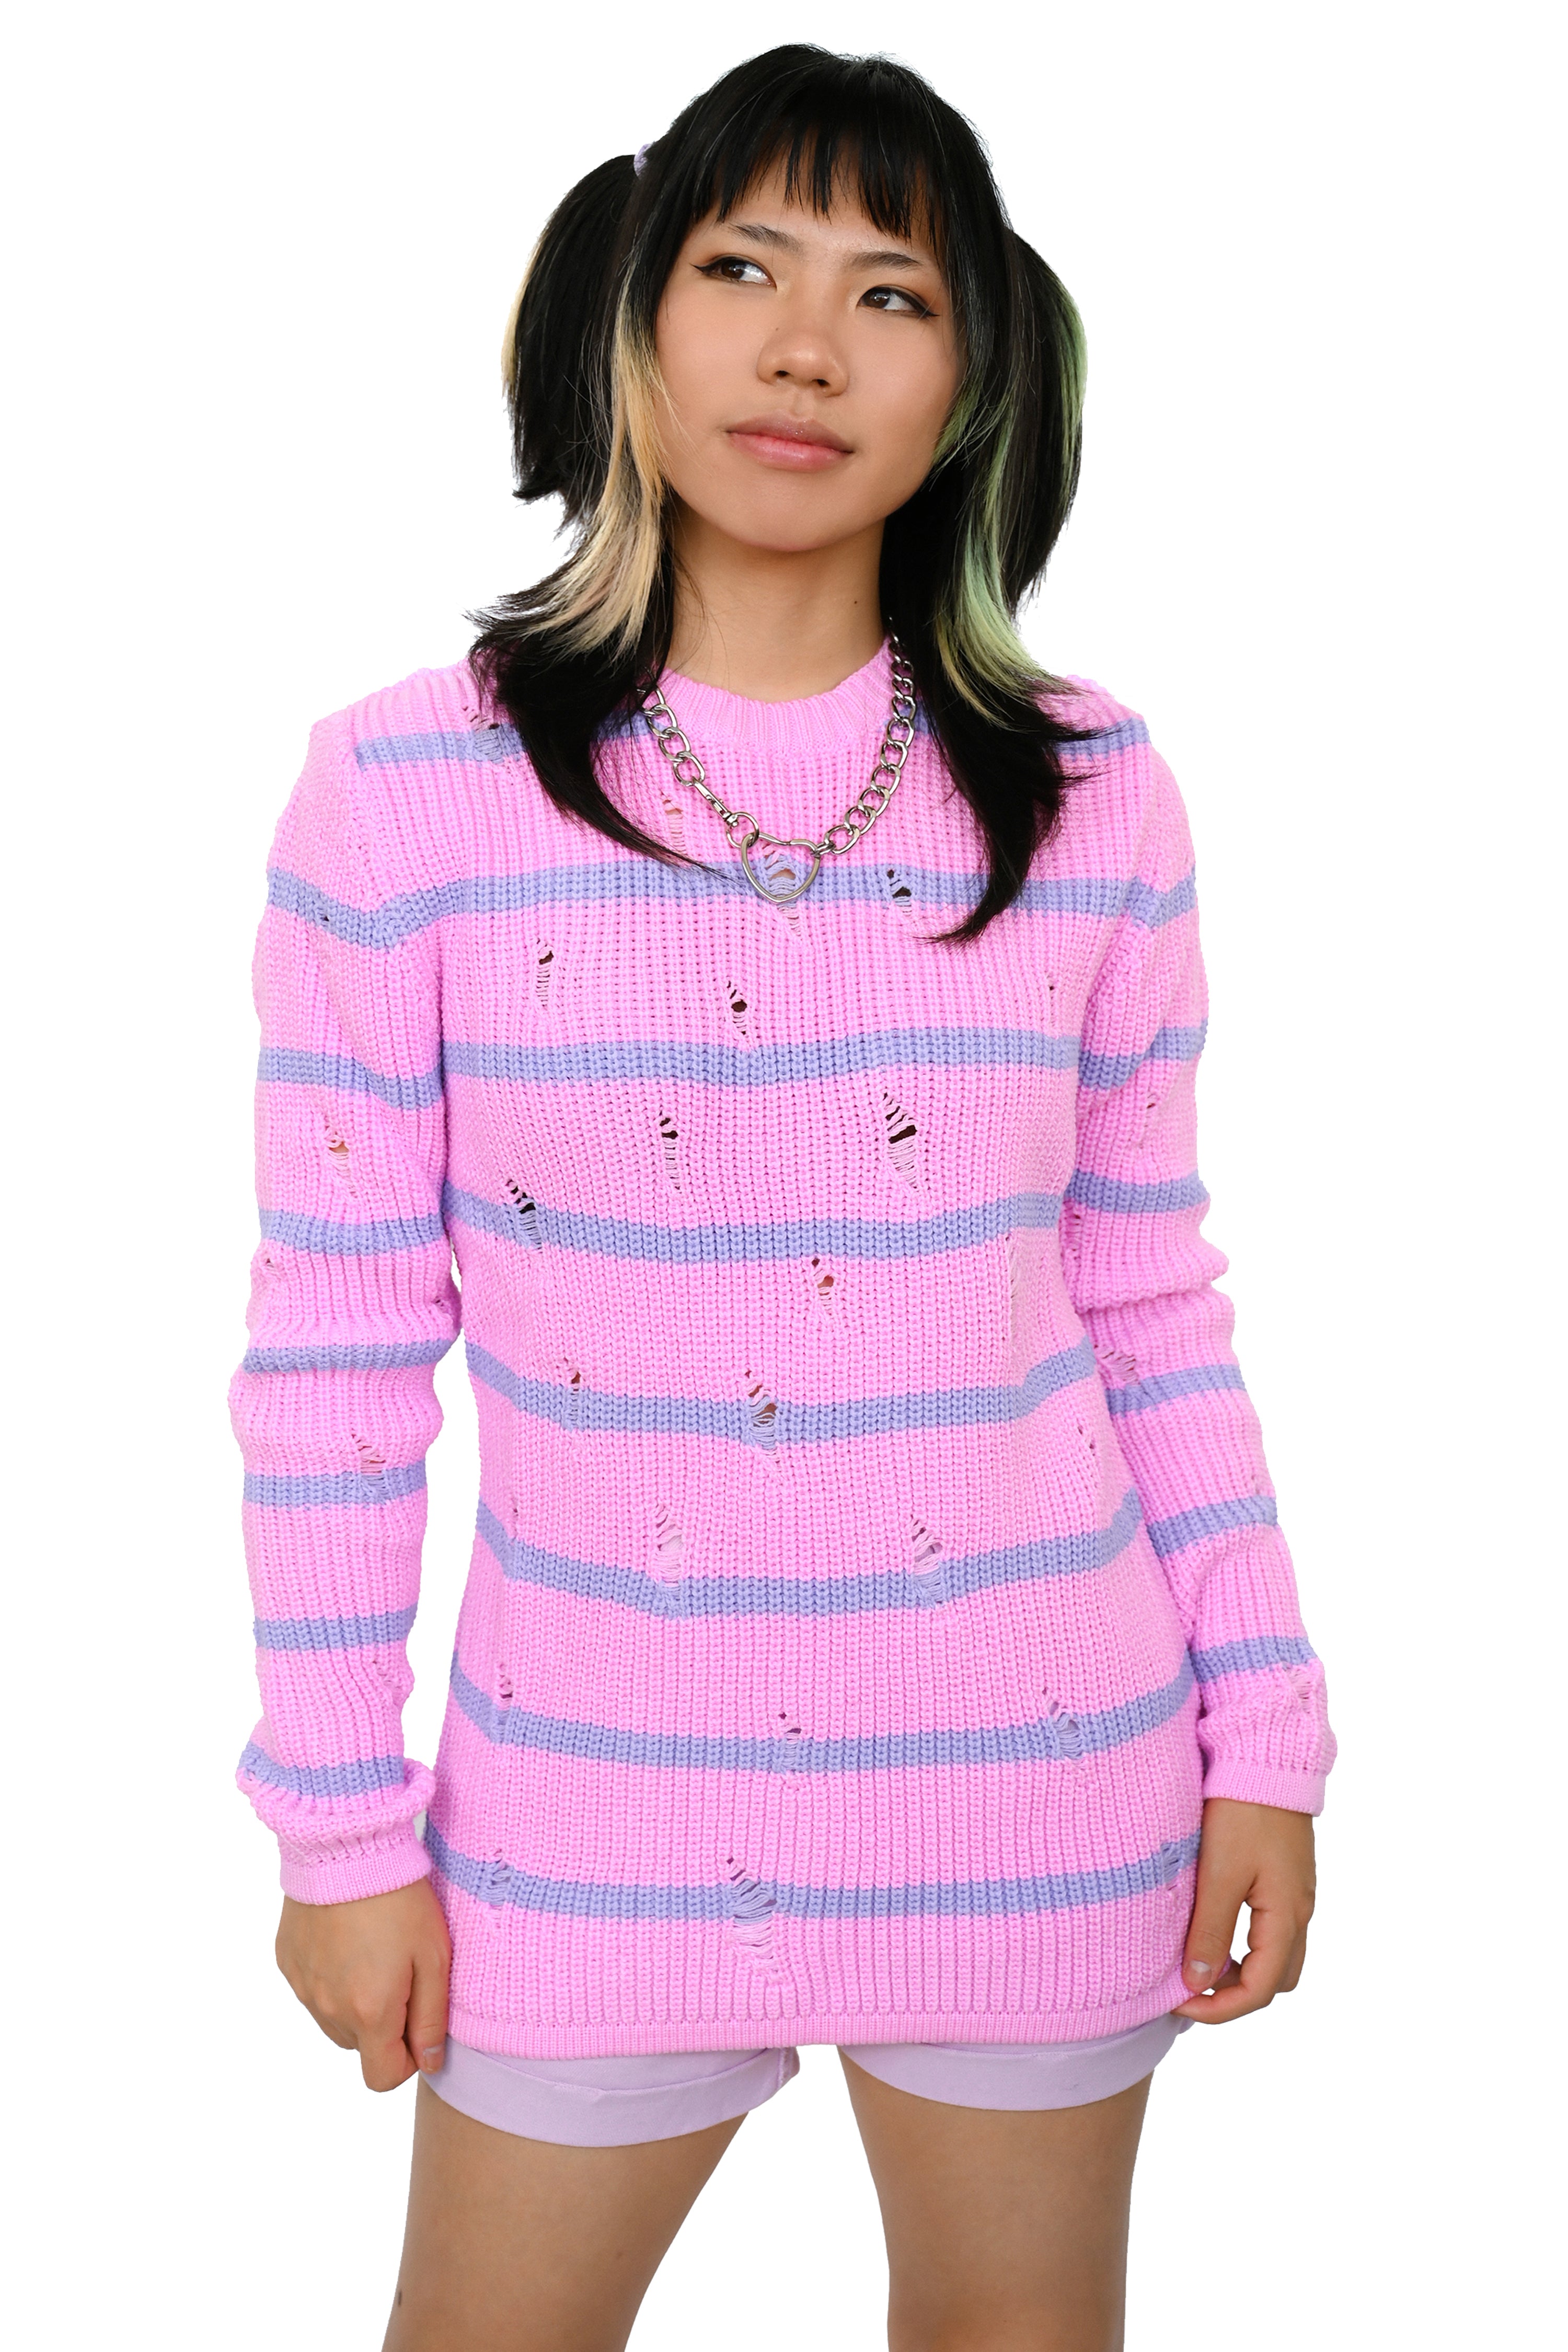 Shredded pink sweater with lavender stripes. 